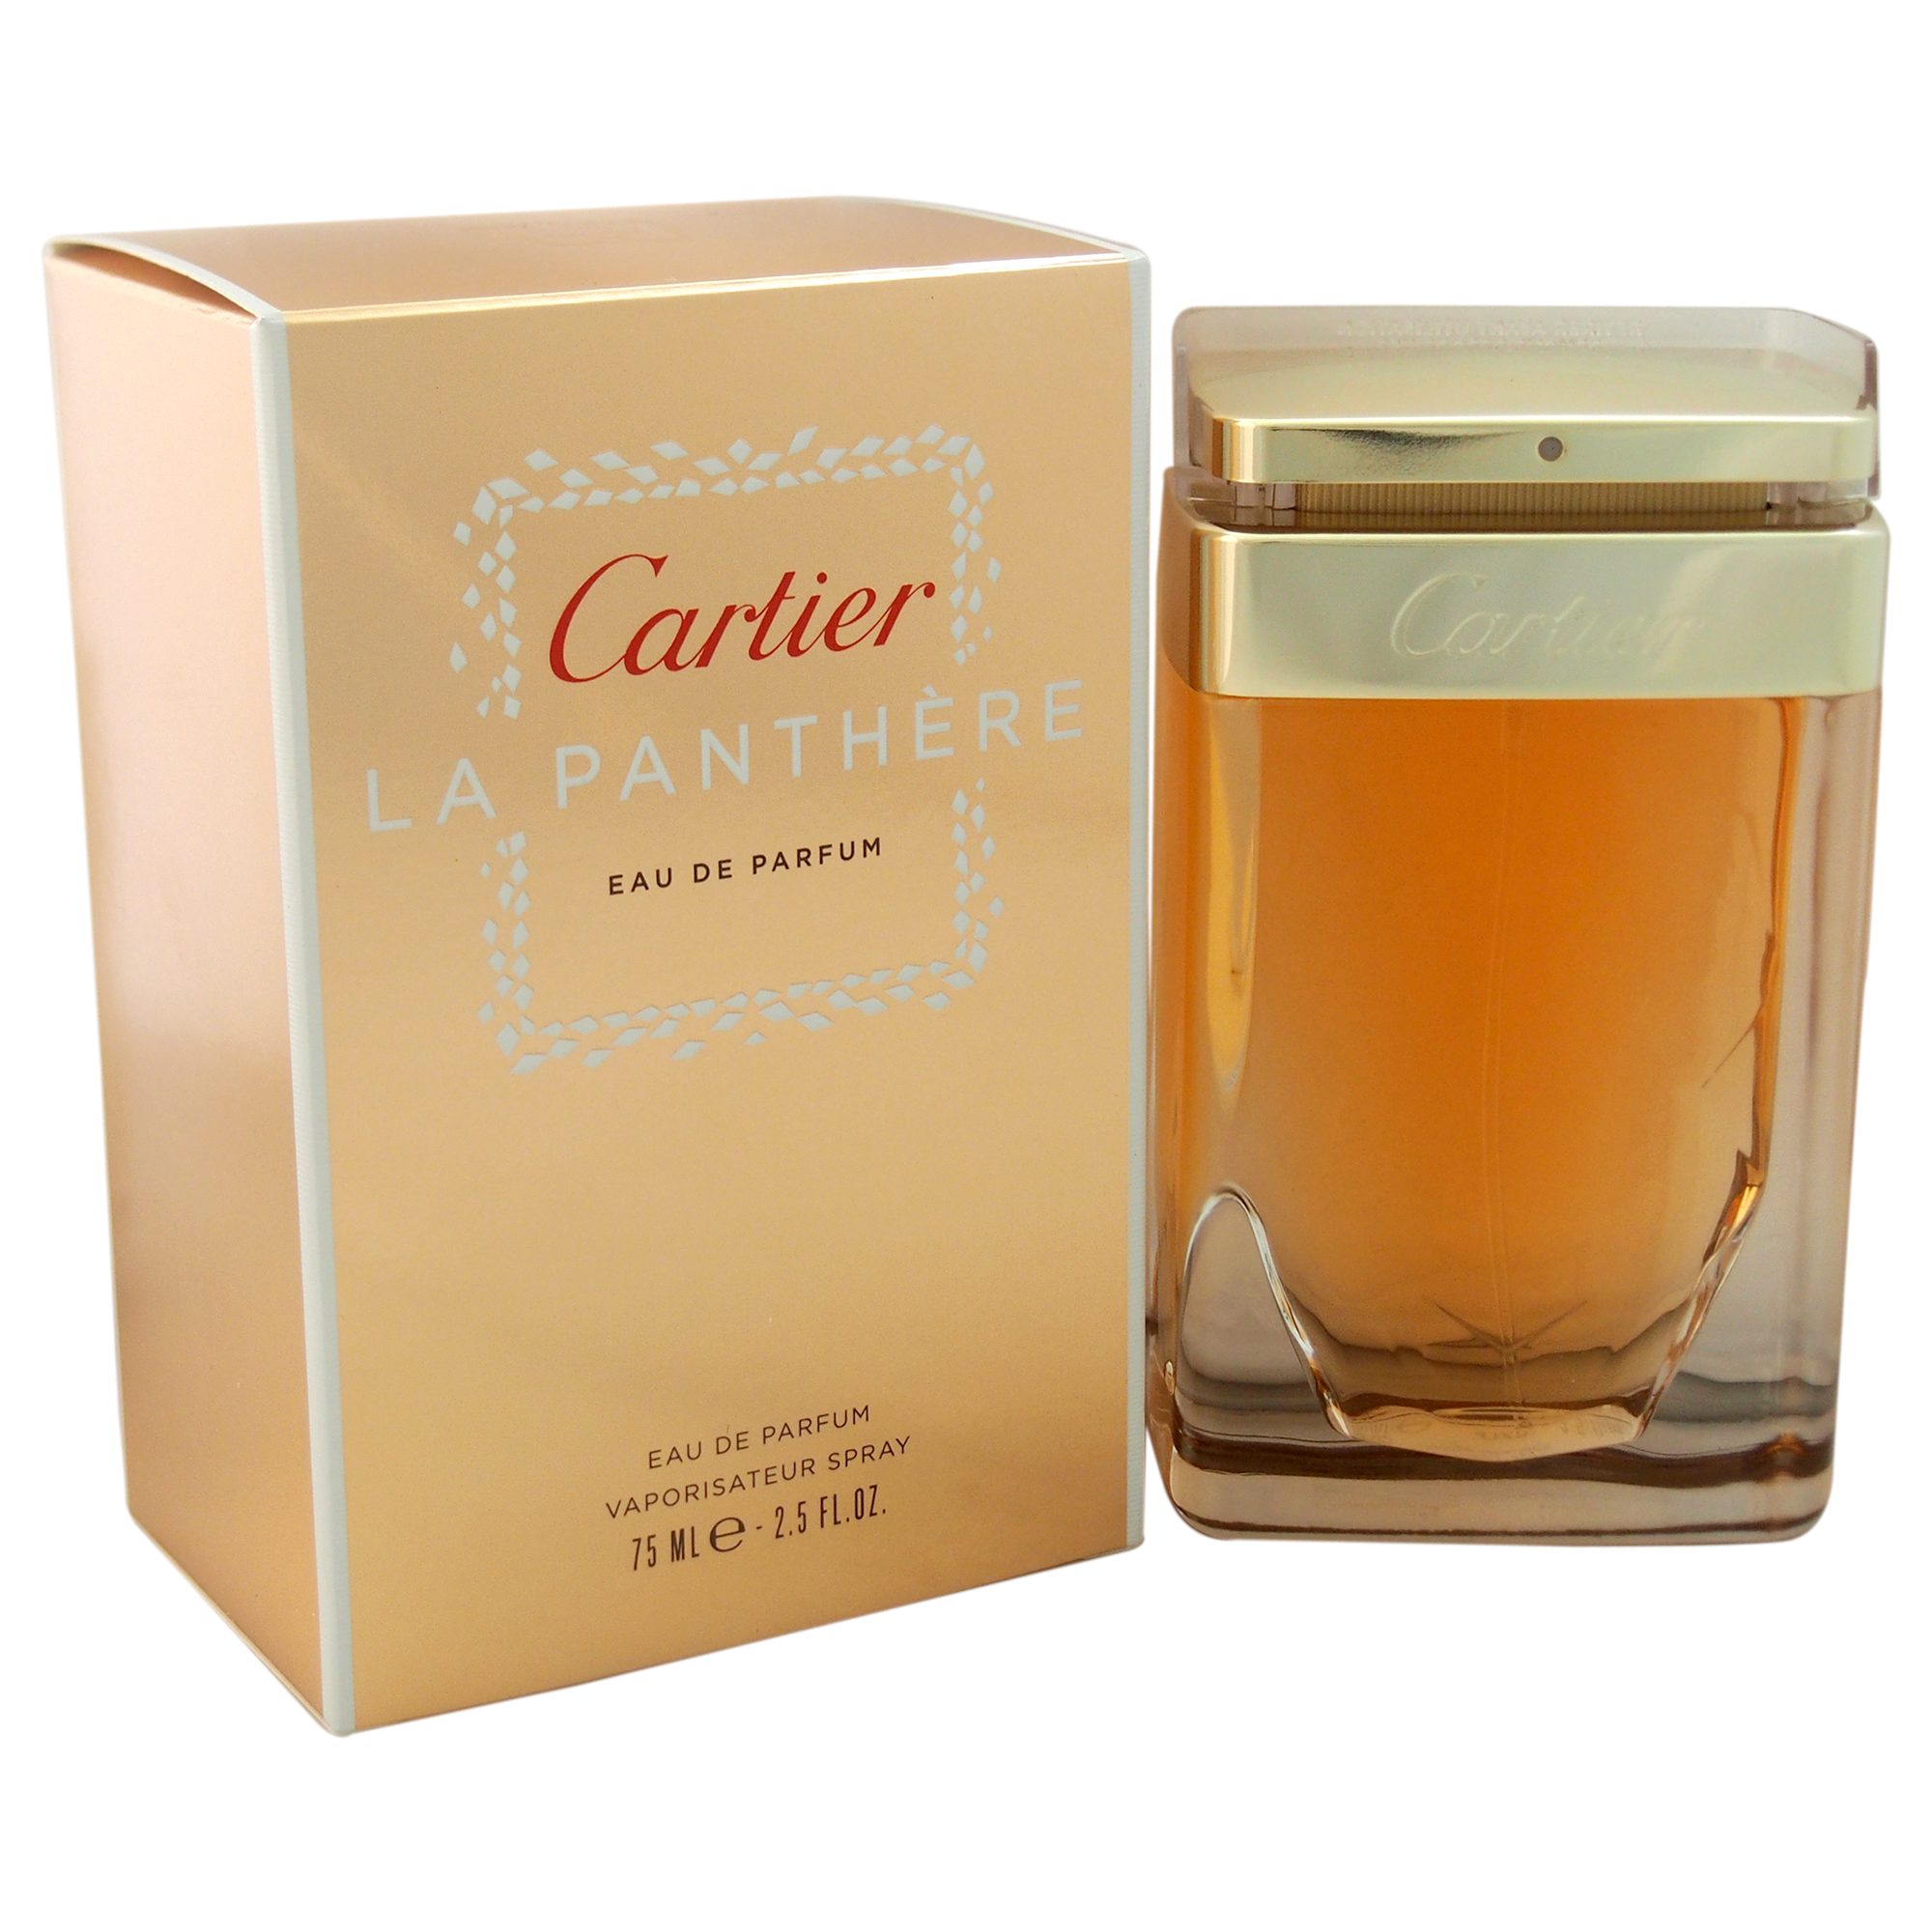 La Panthere by Cartier for Women - 2.5 oz EDP Spray